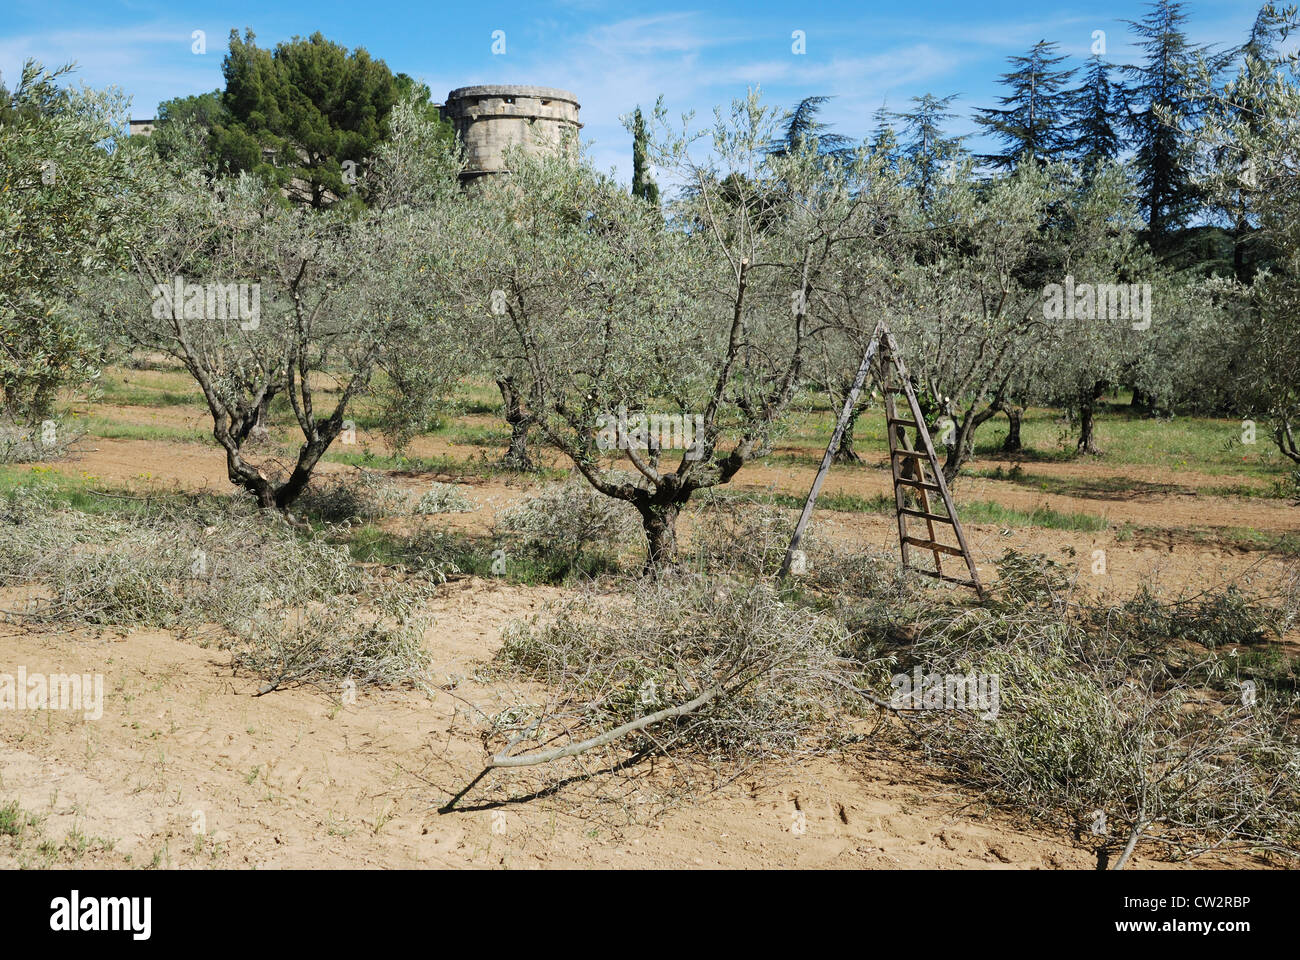 Springtime pruning at the olive grove at Chateau de Lourmarin, Lourmarin, Provence, France. Stock Photo